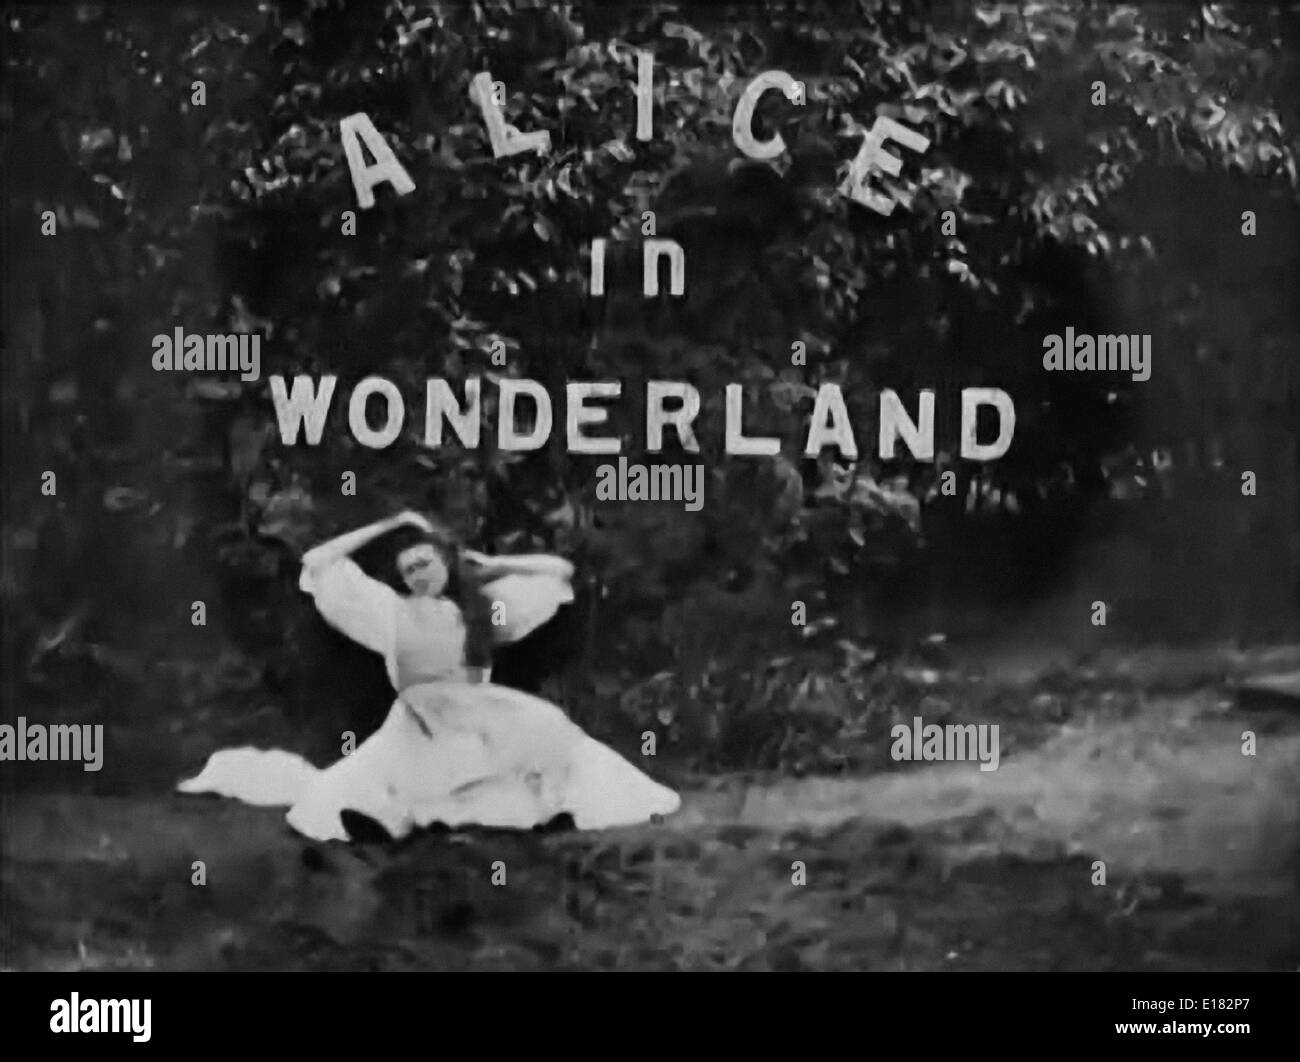 Still from 1903 movie adaptation of Lewis Carroll’s novel ‘Alice in Wonderland’ directed by Cecil M. Hepworth & Percy Stow. Starring May Clark as Alice and Mrs Hepworth as the Queen and White Rabbit. Still shows title, Alice about to fall to sleep and encounter the White Rabbit. Stock Photo